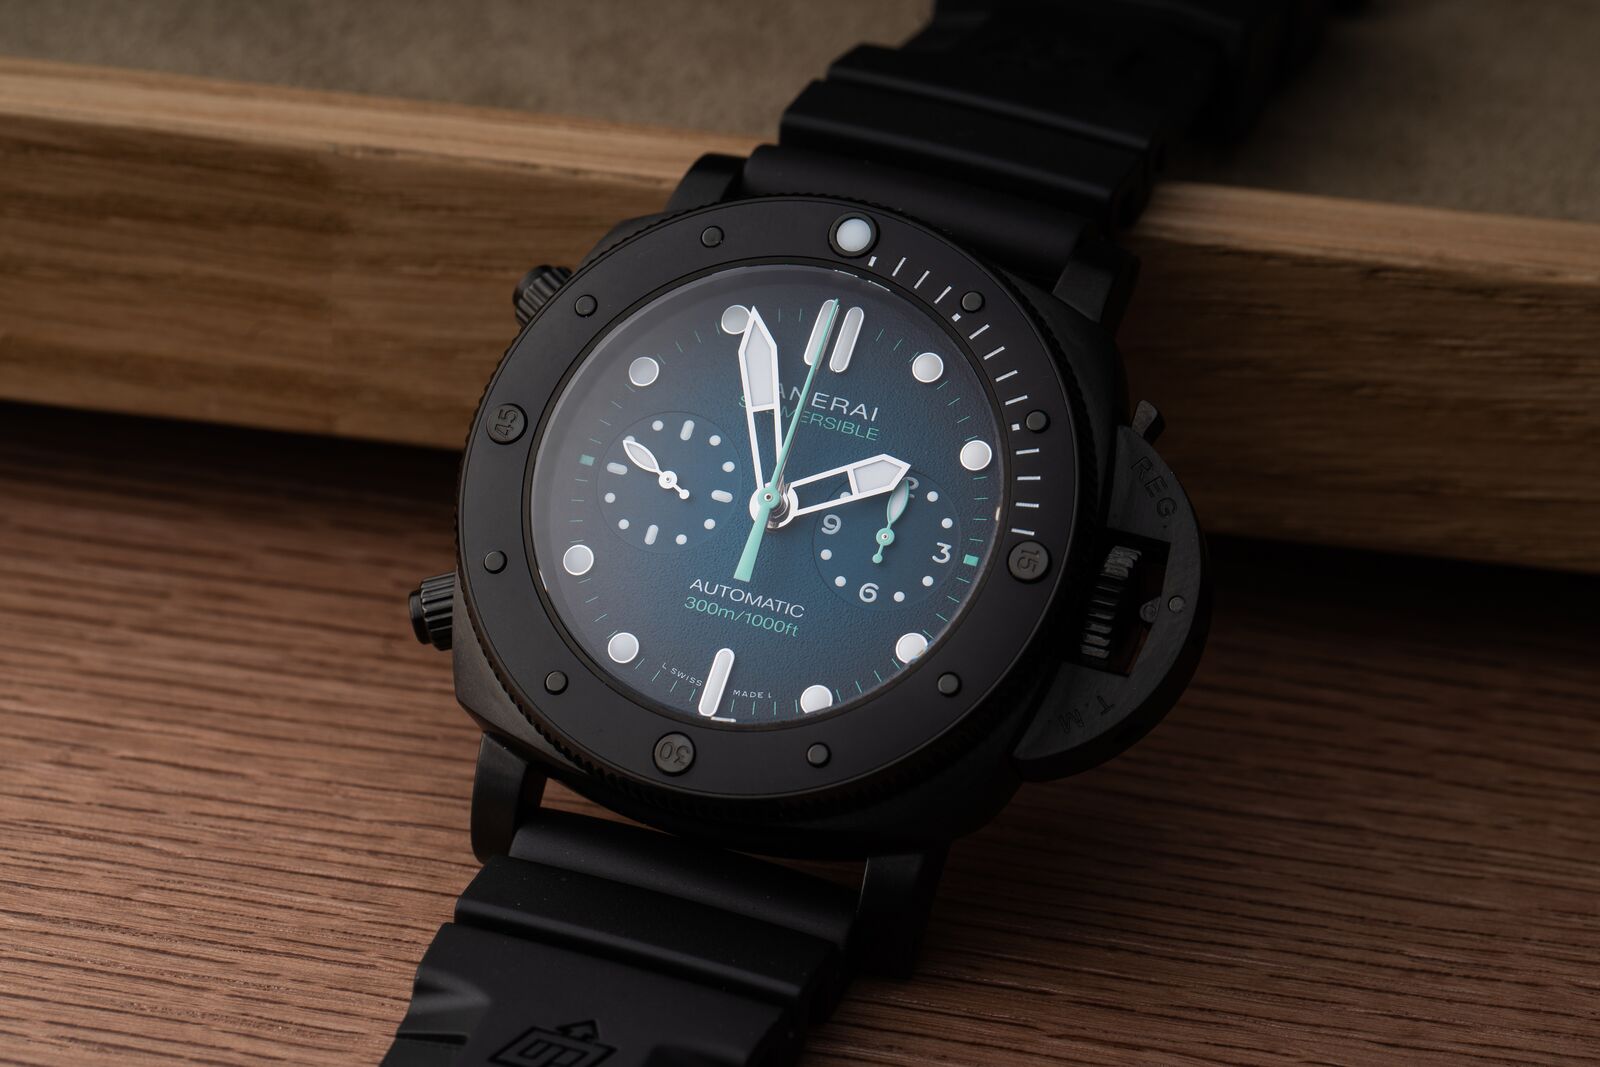 Watch of the Week: Panerai Submersible Chrono Guillaume Nery Edition